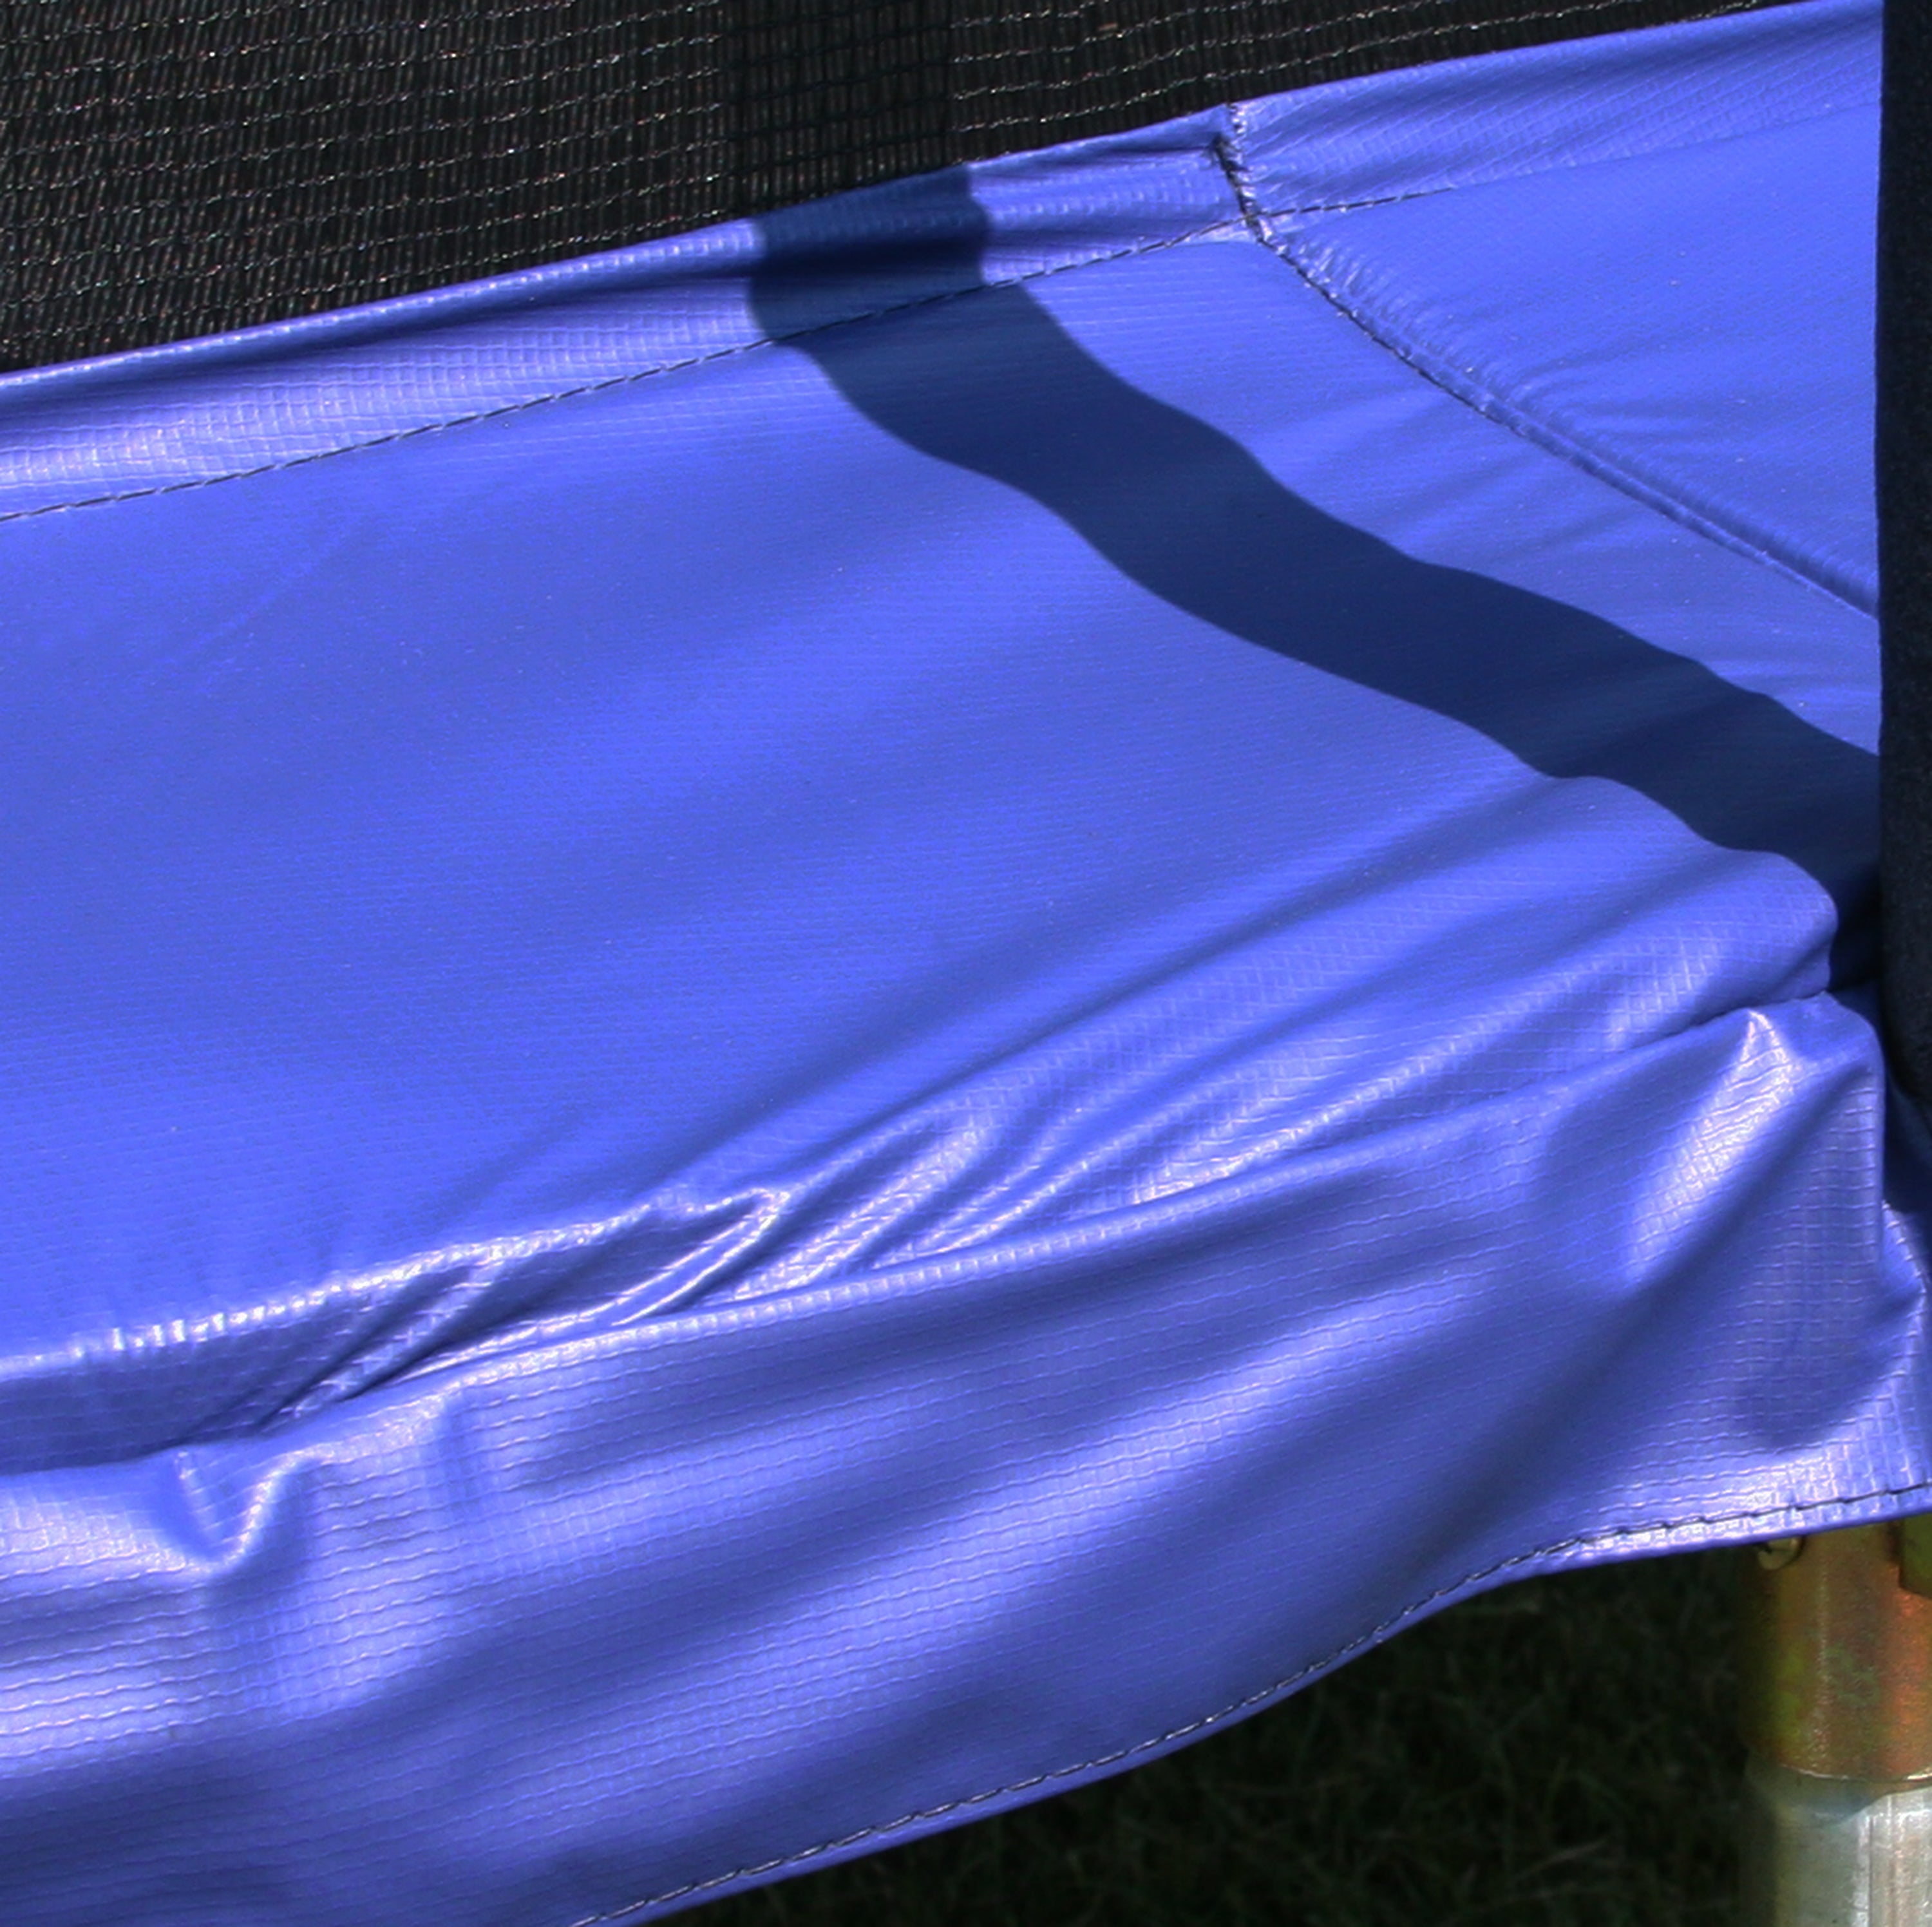 15-foot round blue spring pad as seen on a trampoline. 